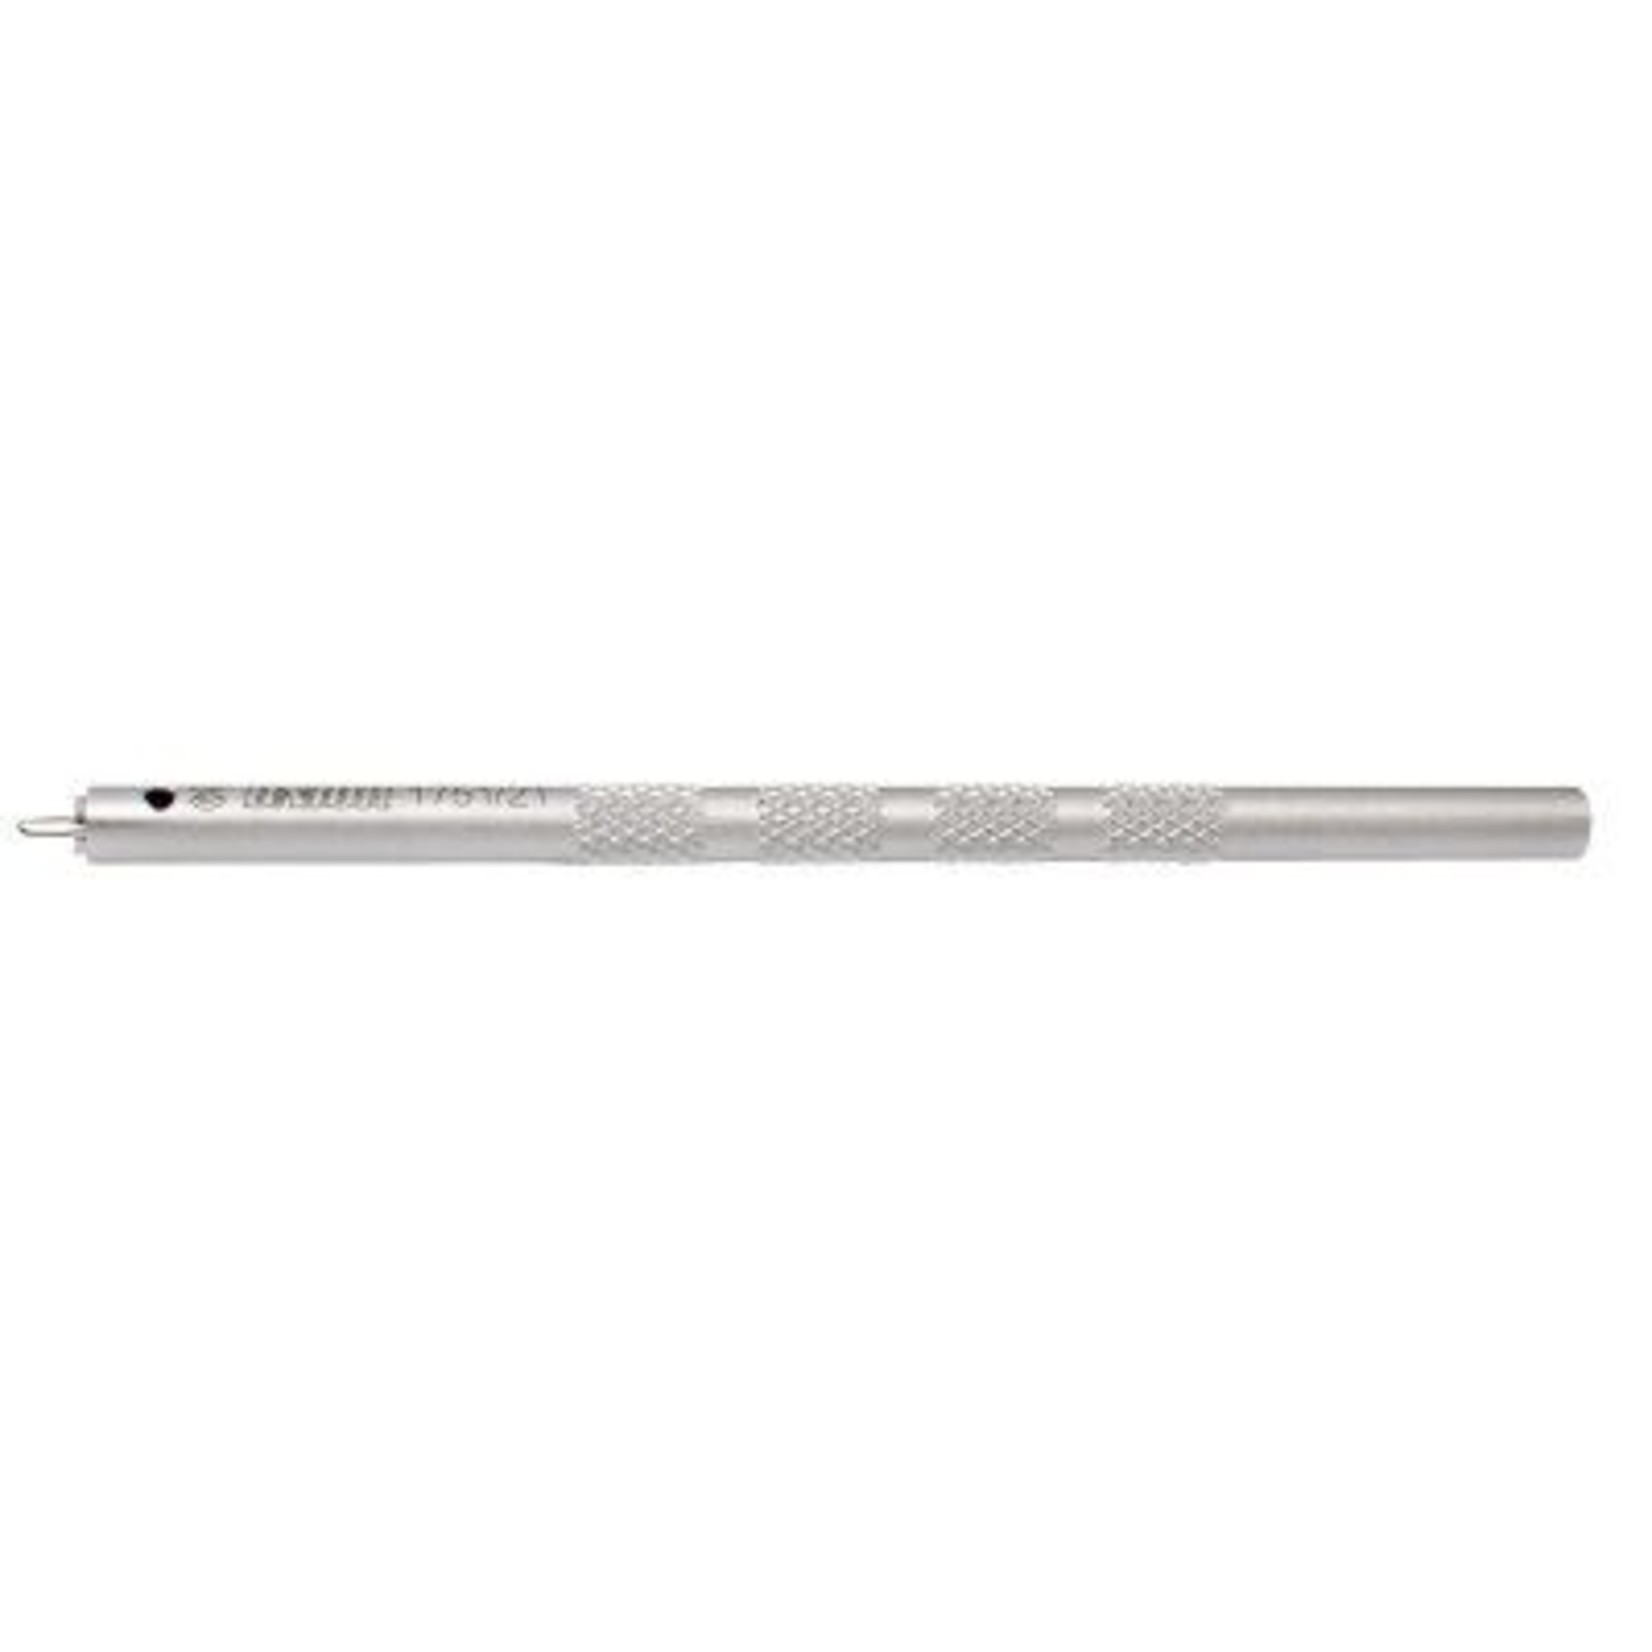 Incomex Trading Pty Ltd Unior Nipple Assembly Tool 623299 Professional Bicycle Tool Quality Guaranteed